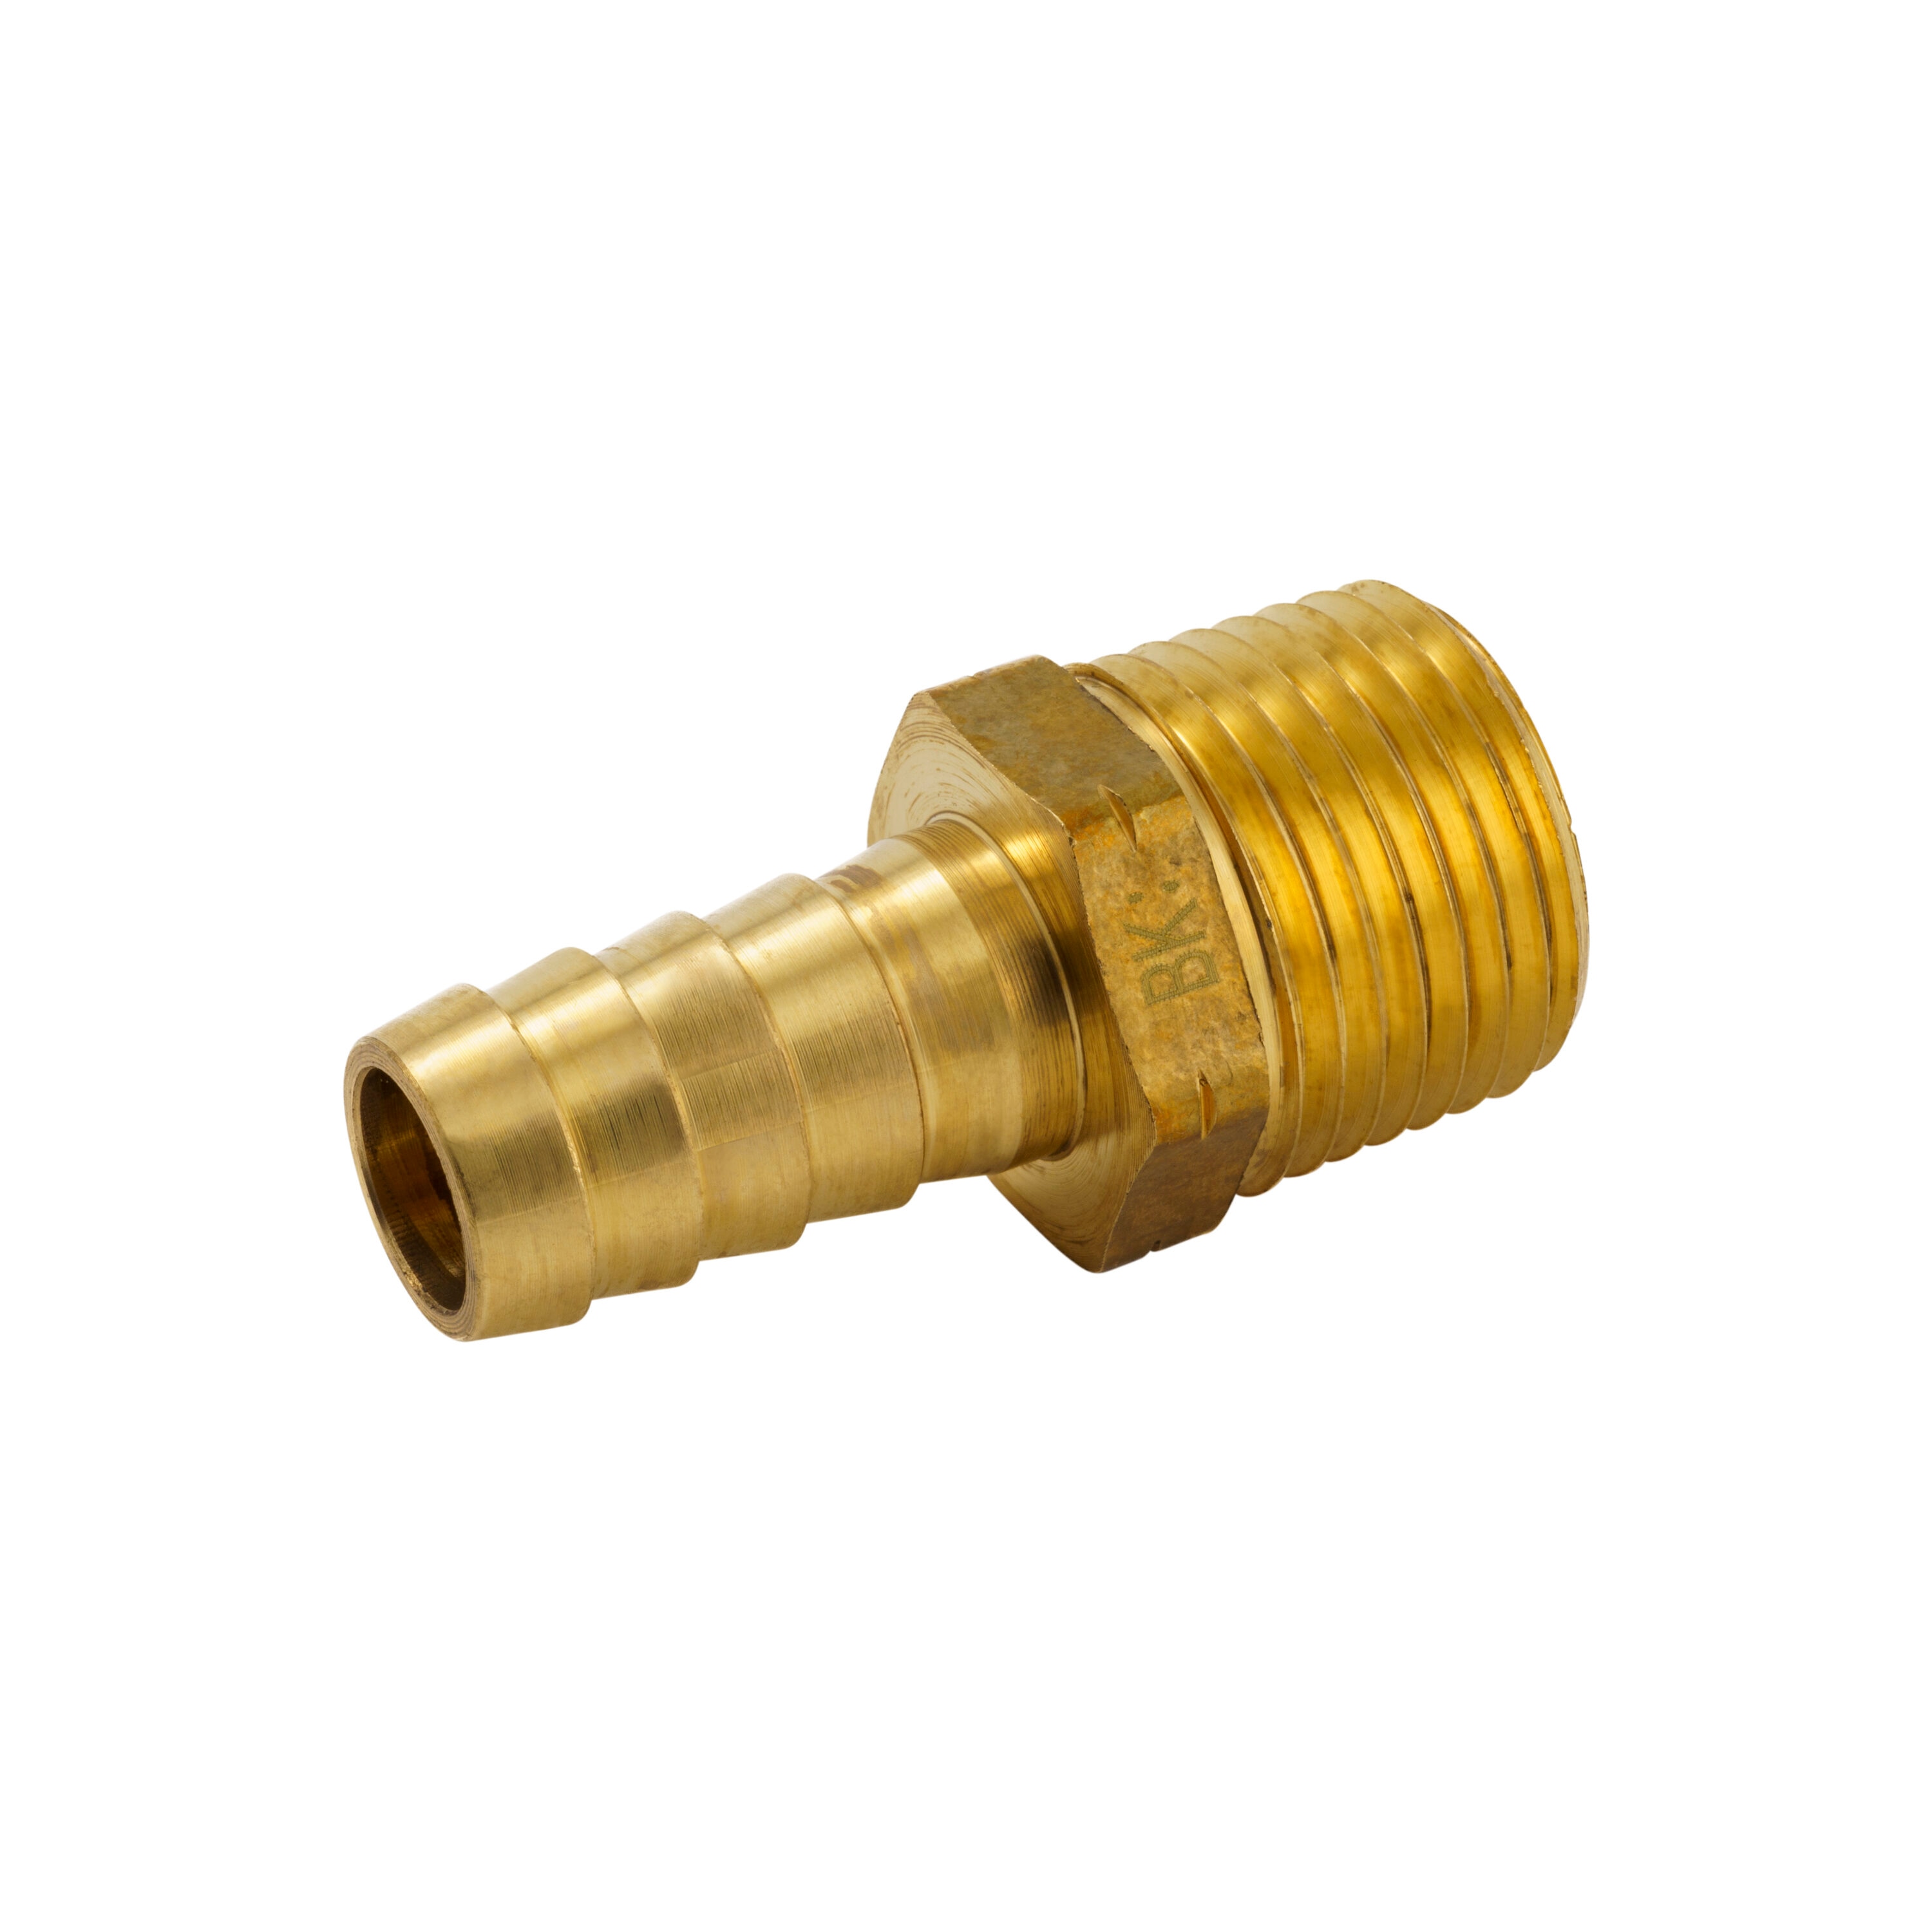 Hose Barb Brass Fittings